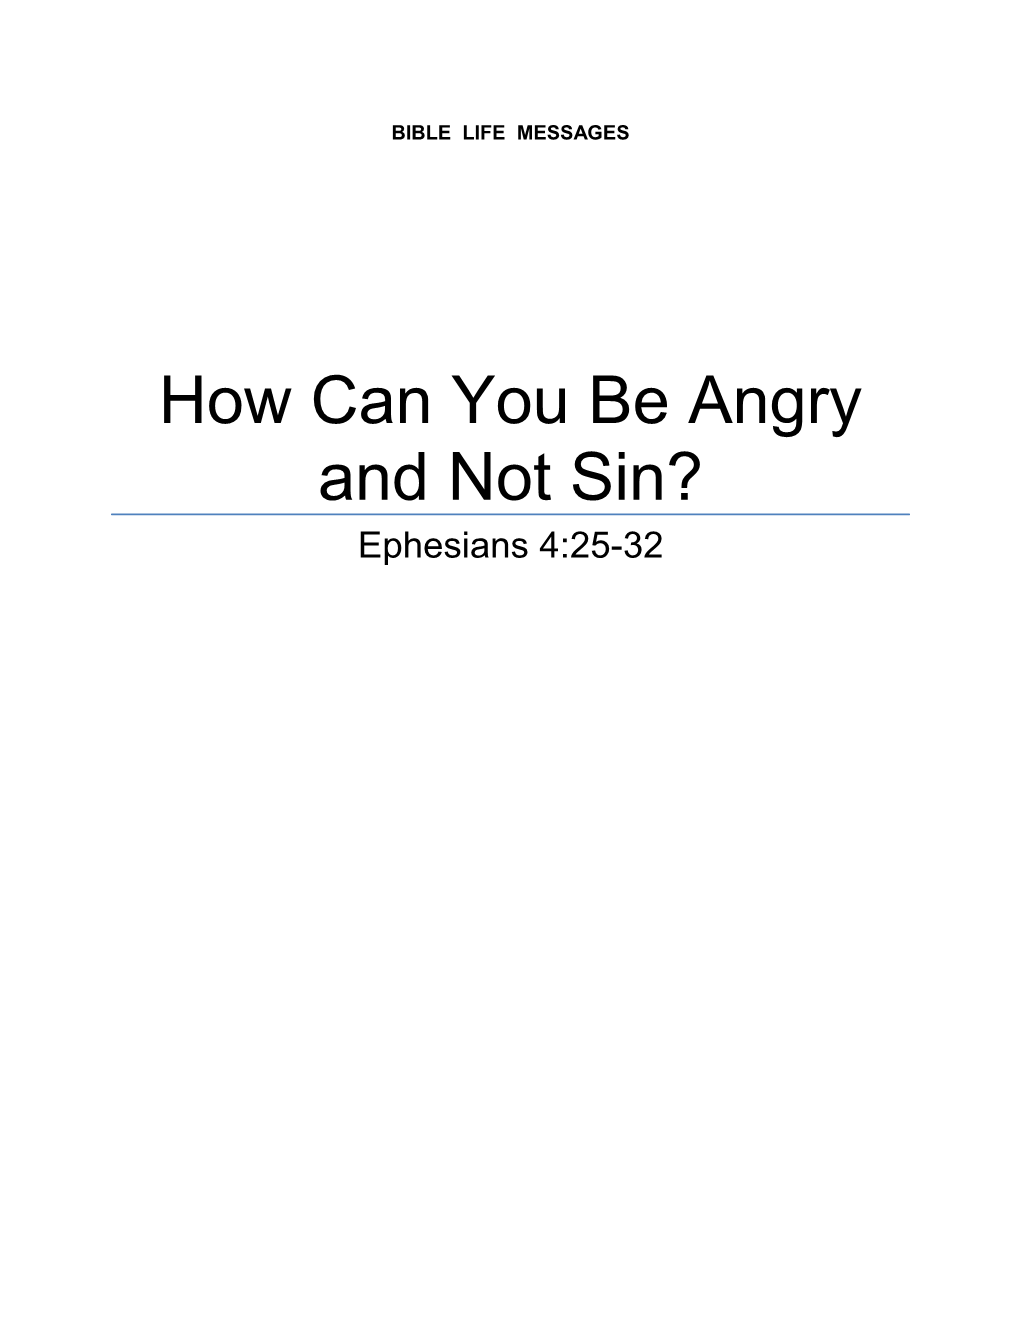 How Can You Be Angry and Not Sin?